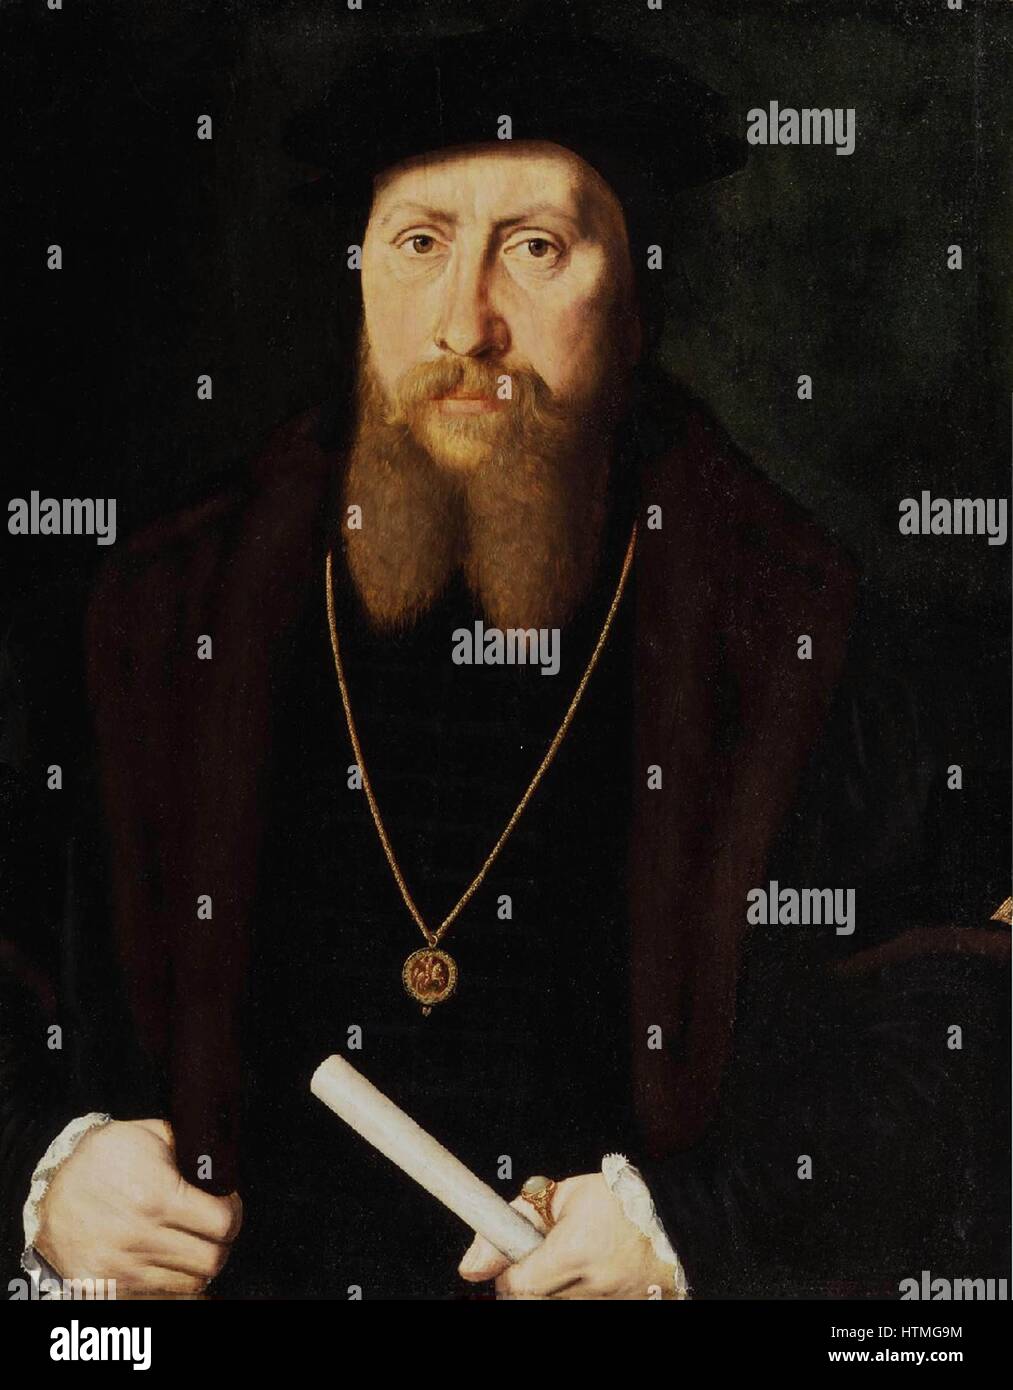 William Paget, 1st Baron Paget of Beaudesert (1506-1563) English statesman and diplomat, adviser to Henry VIII. Comptroller of the Household to Edward VI. Portrait of Paget wearing a jewel showing St George, the symbol of the Order of the Garter. Attribut Stock Photo